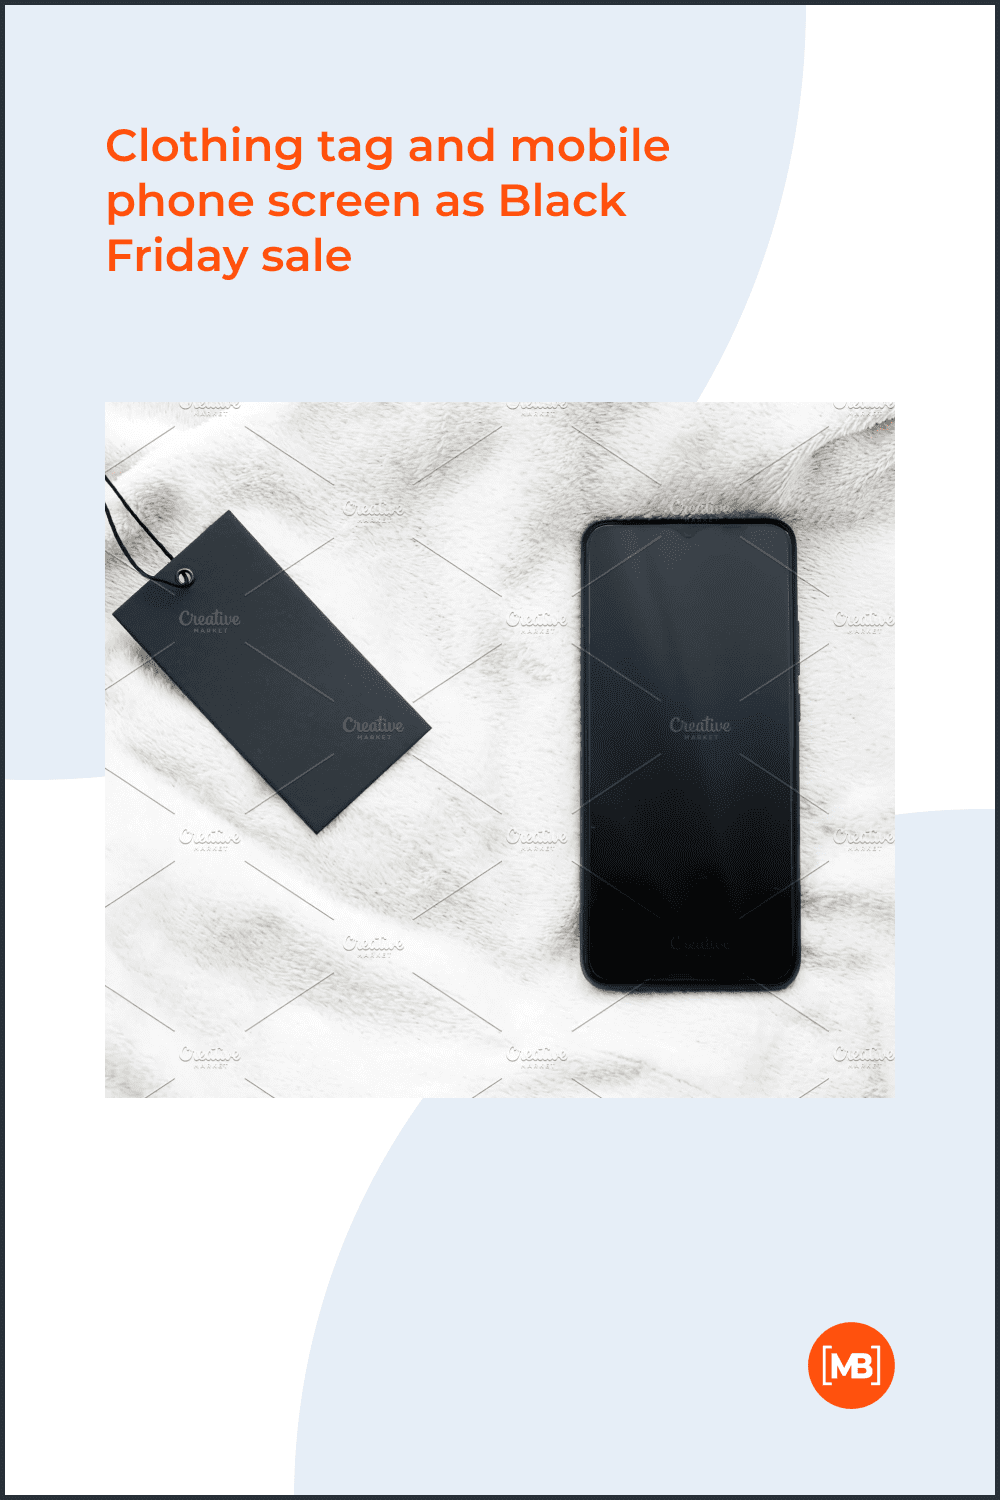 Clothing tag and mobile phone screen as Black Friday sale.